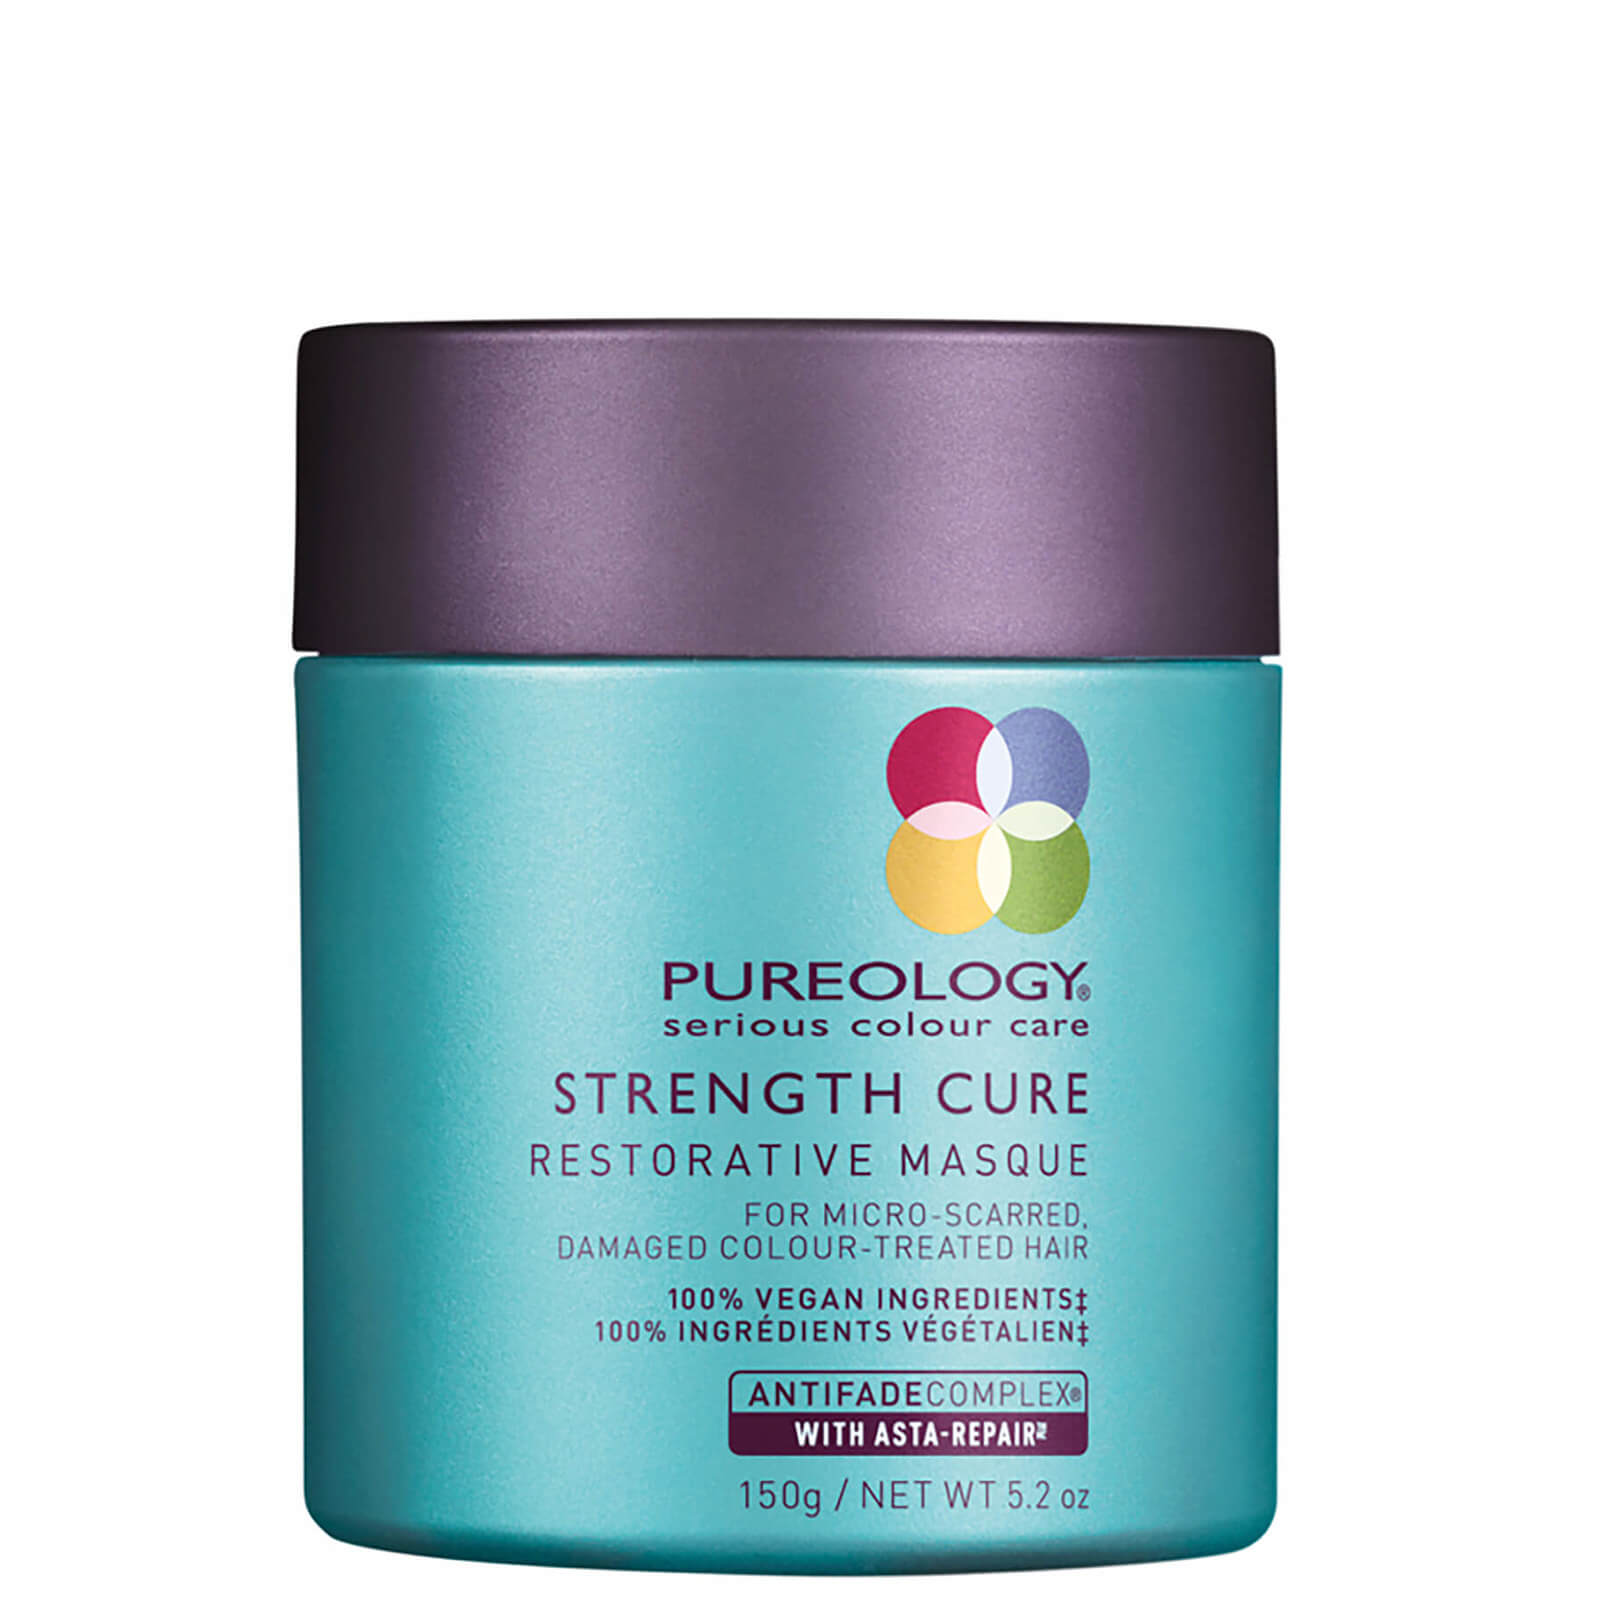 Mascarilla fortificante Pureology Strength Cure (150g)